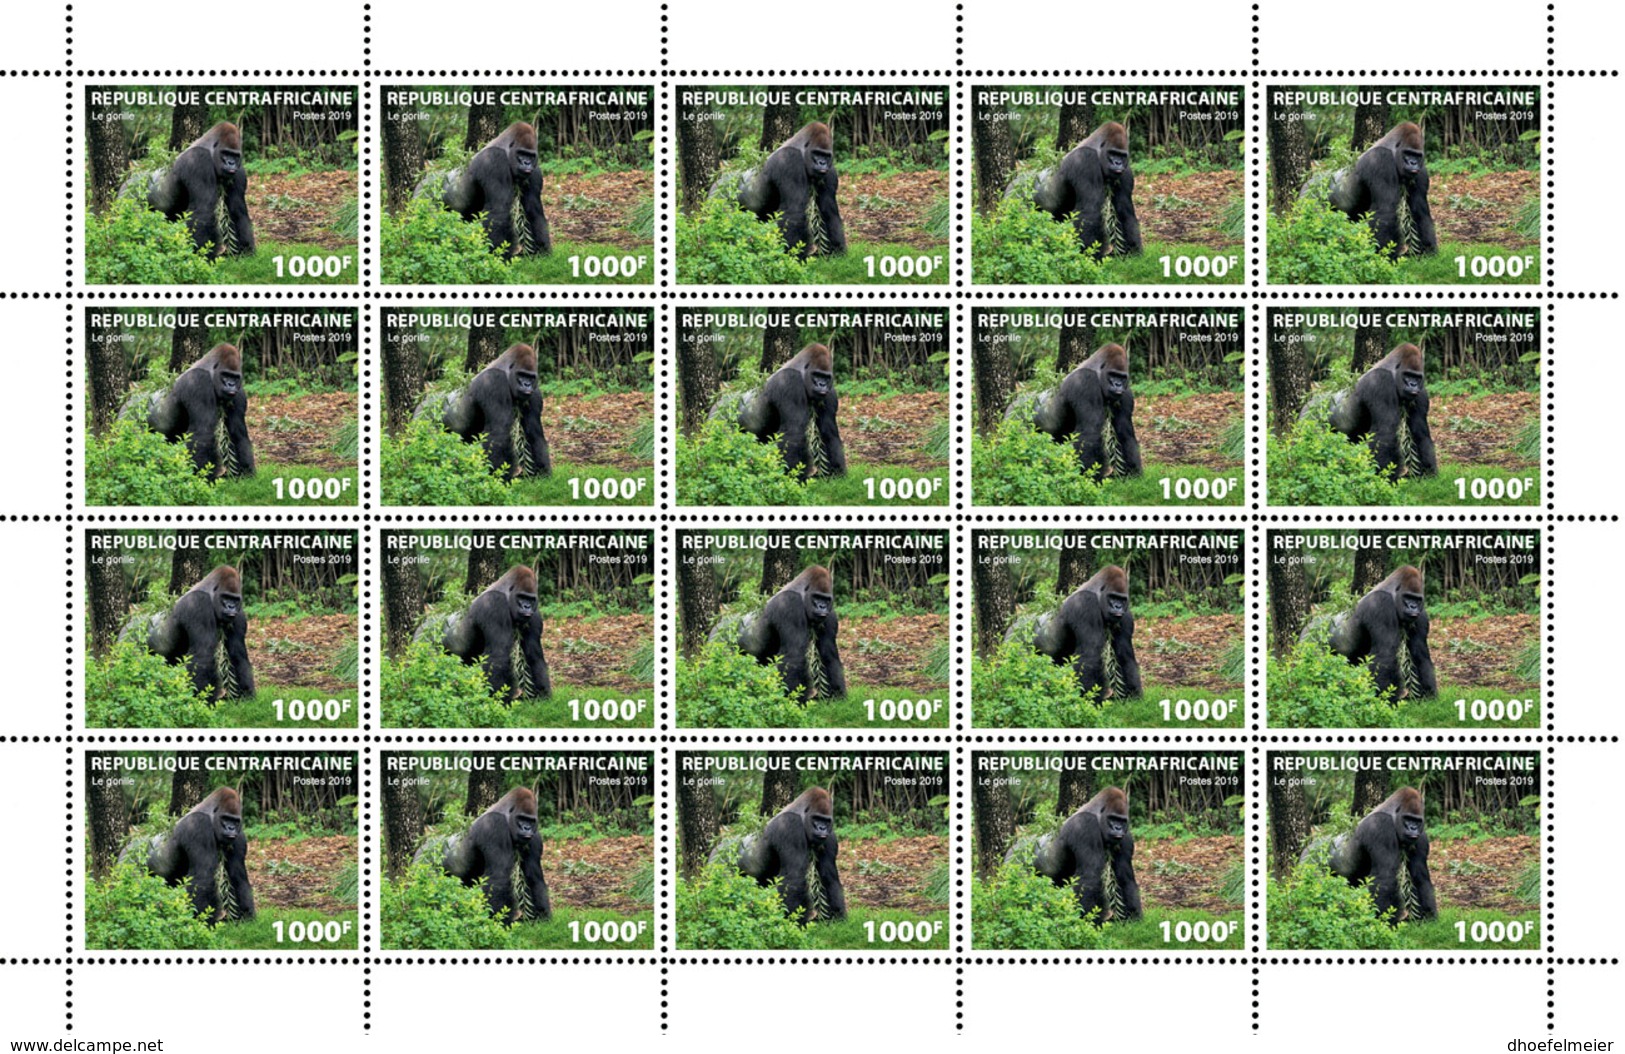 CENTRAL AFRICA 2019 MNH Gorilla M/S LOCAL - OFFICIAL ISSUE - DH1911 - Gorilles